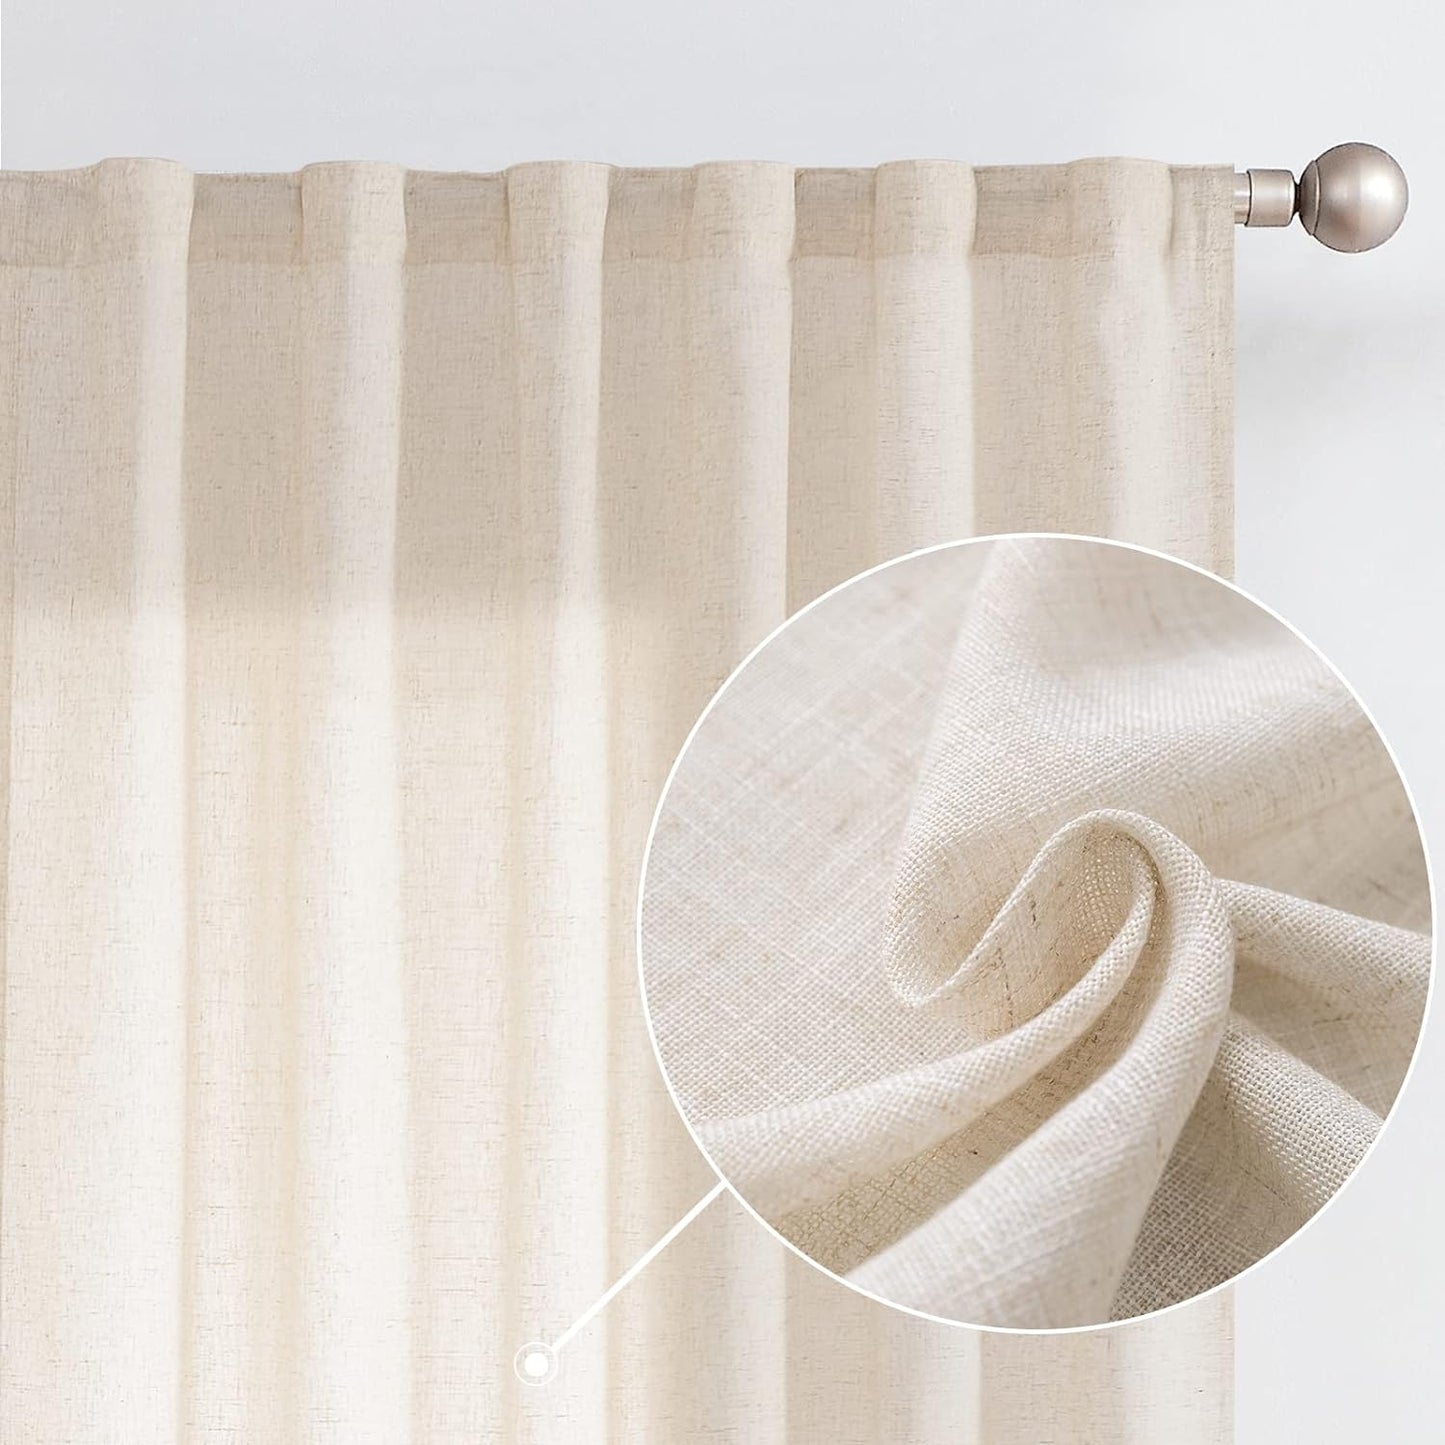 Lazzzy Christmas Linen Semi Sheer Curtains for Living Room Decor for Bedroom Thermal Insulated Curtain for Winter Cream Beige Boho Curtains Rod Pocket Window Treatments Drapes, 63 Inch Long,2 Panels  TOPICK Linen Crude W50 X L84 